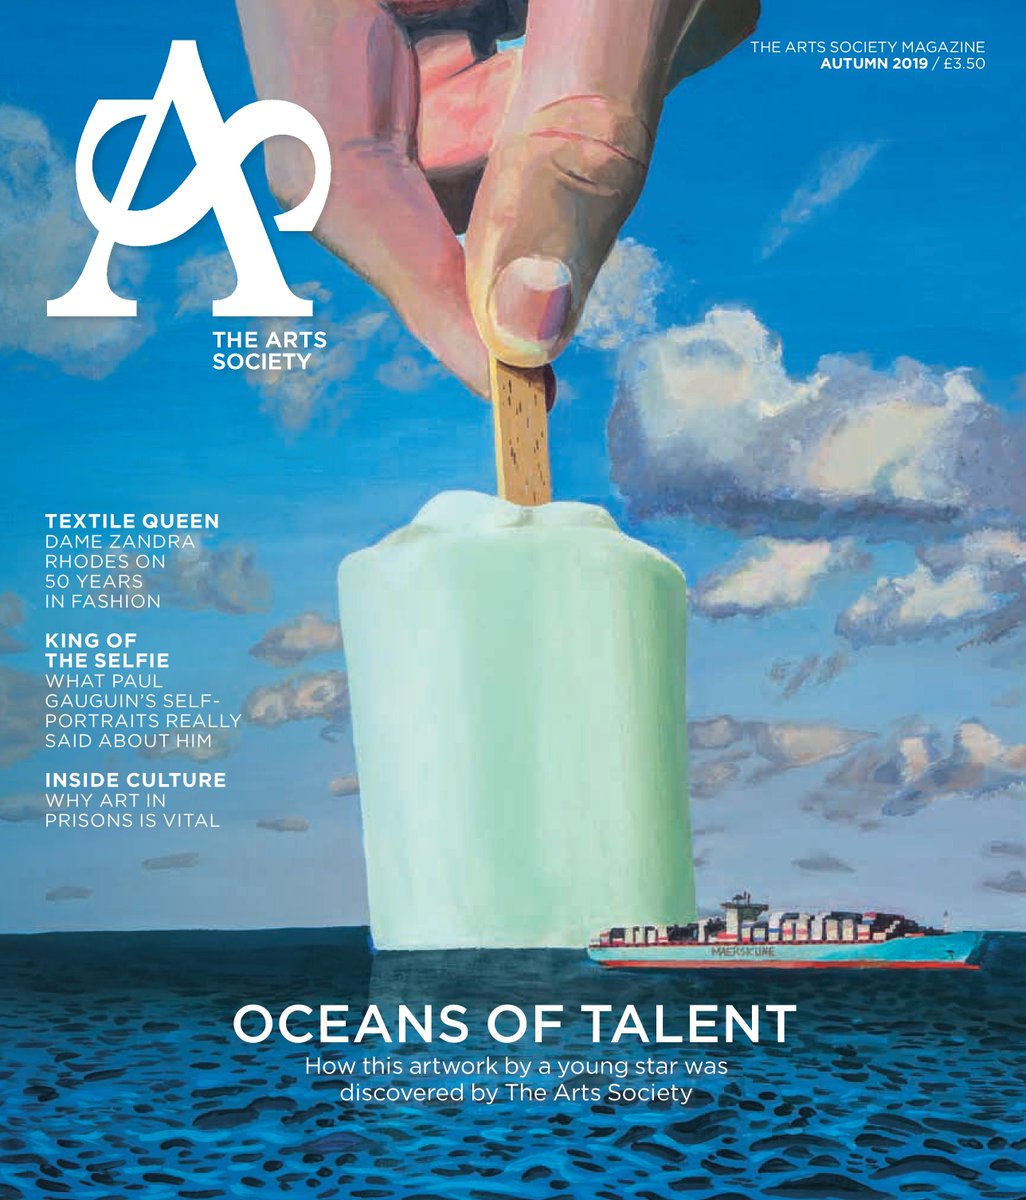 So much in our @TheArtsSociety_  #September issue. Interview with @ZandraRhodes | #art in #prison with @angelas_talks | #gauguin @NationalGallery | @DrJaninaRamirez art choices | Raoul Dufy story from @goldmarkgallery | posters at @NAM_London – & how our members spot new #artists